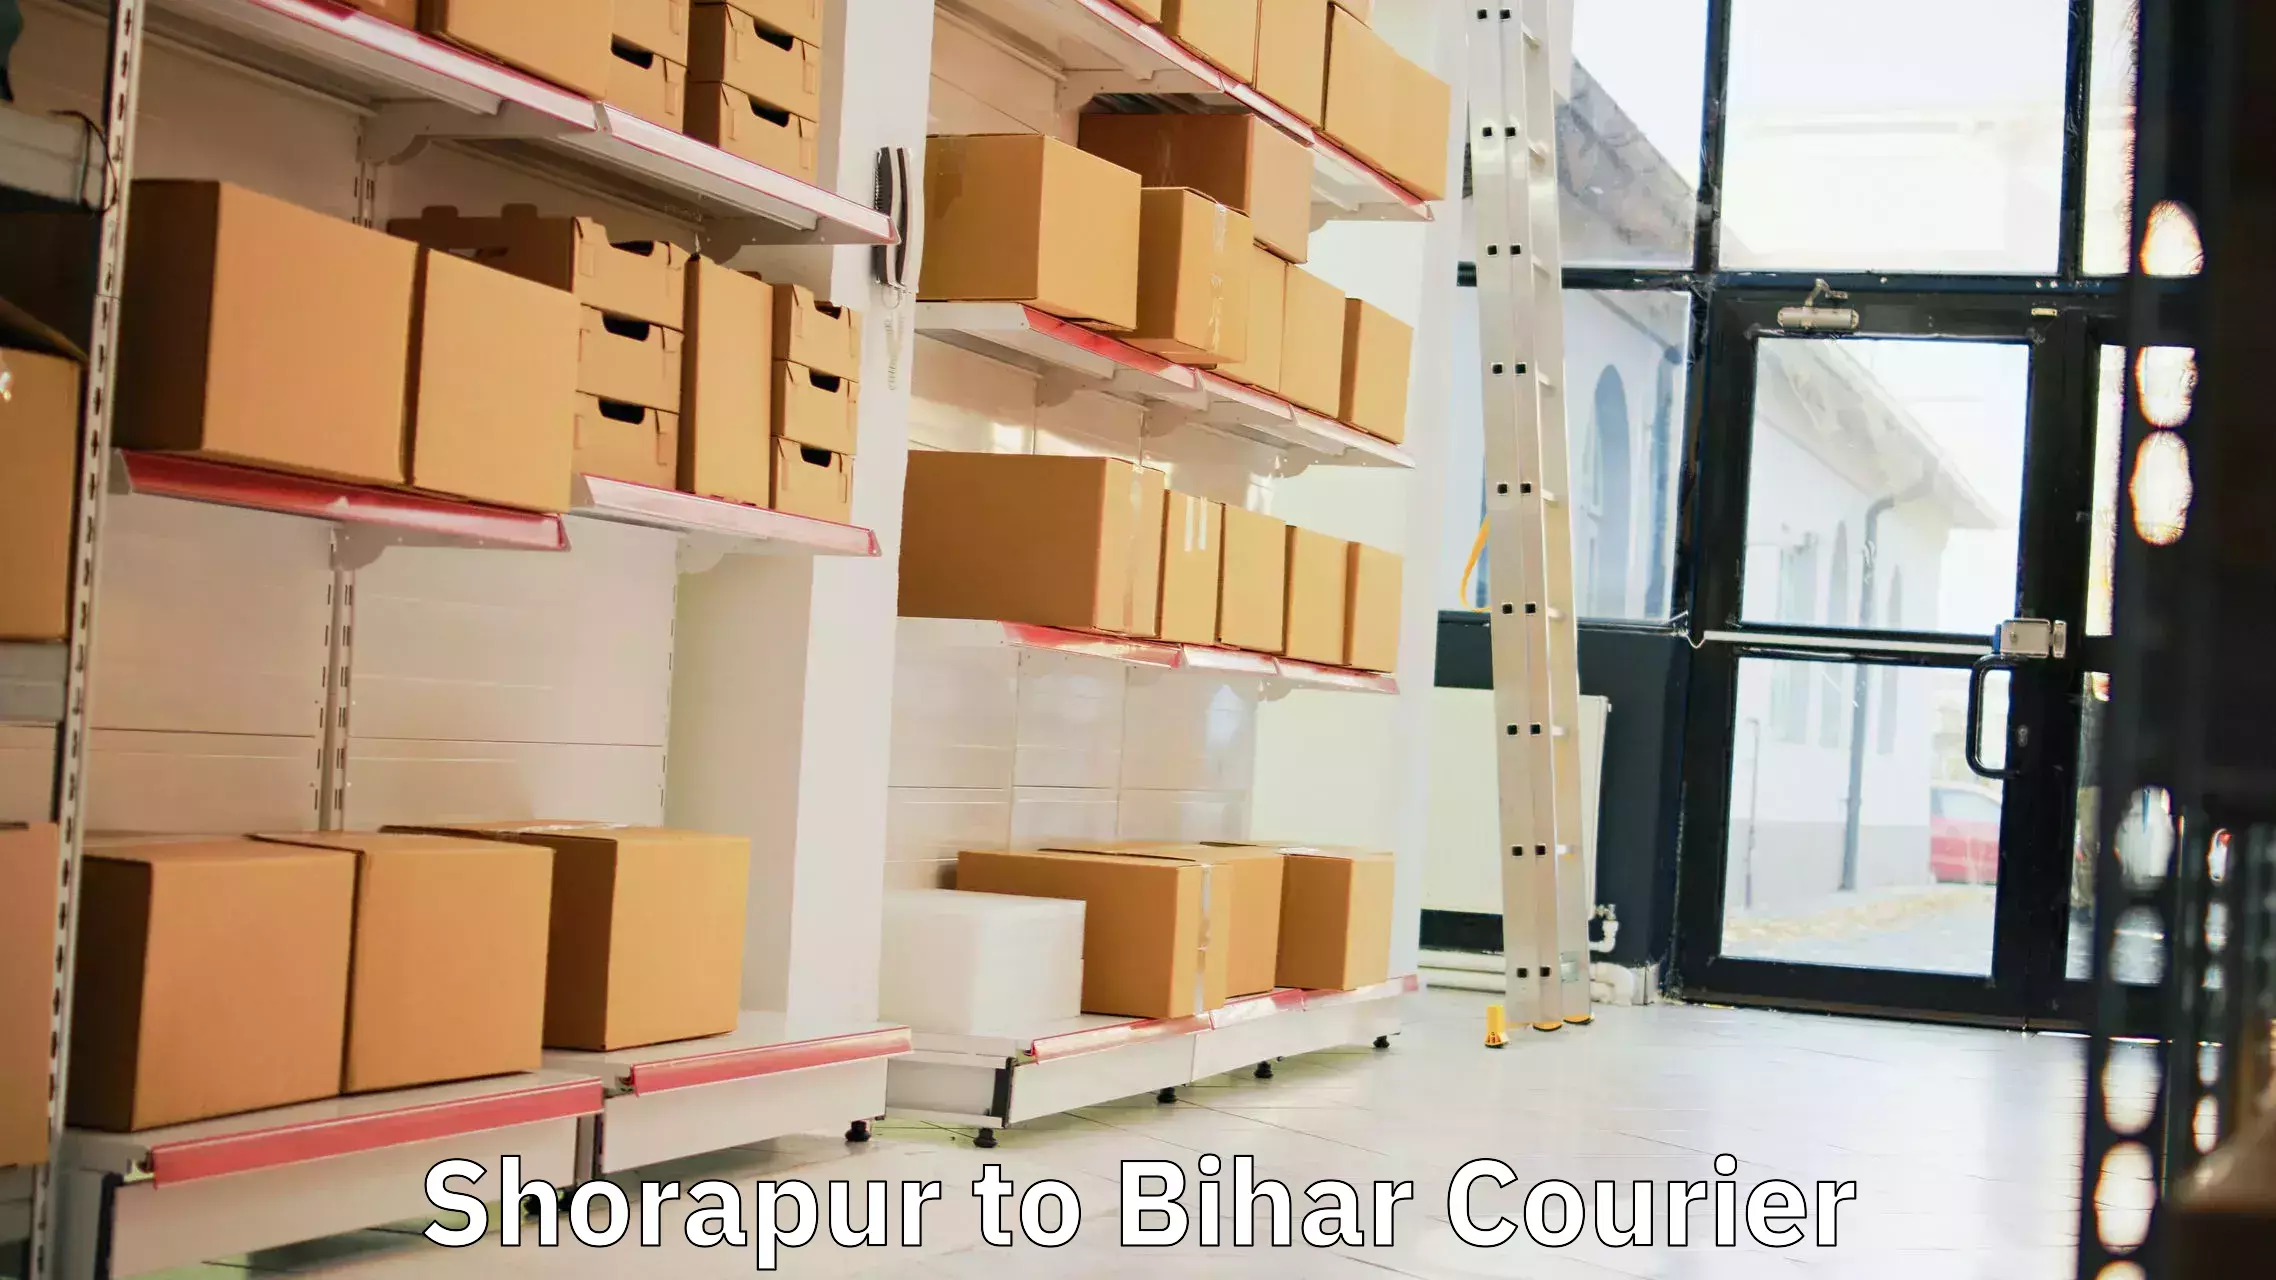 State-of-the-art courier technology Shorapur to Sheohar